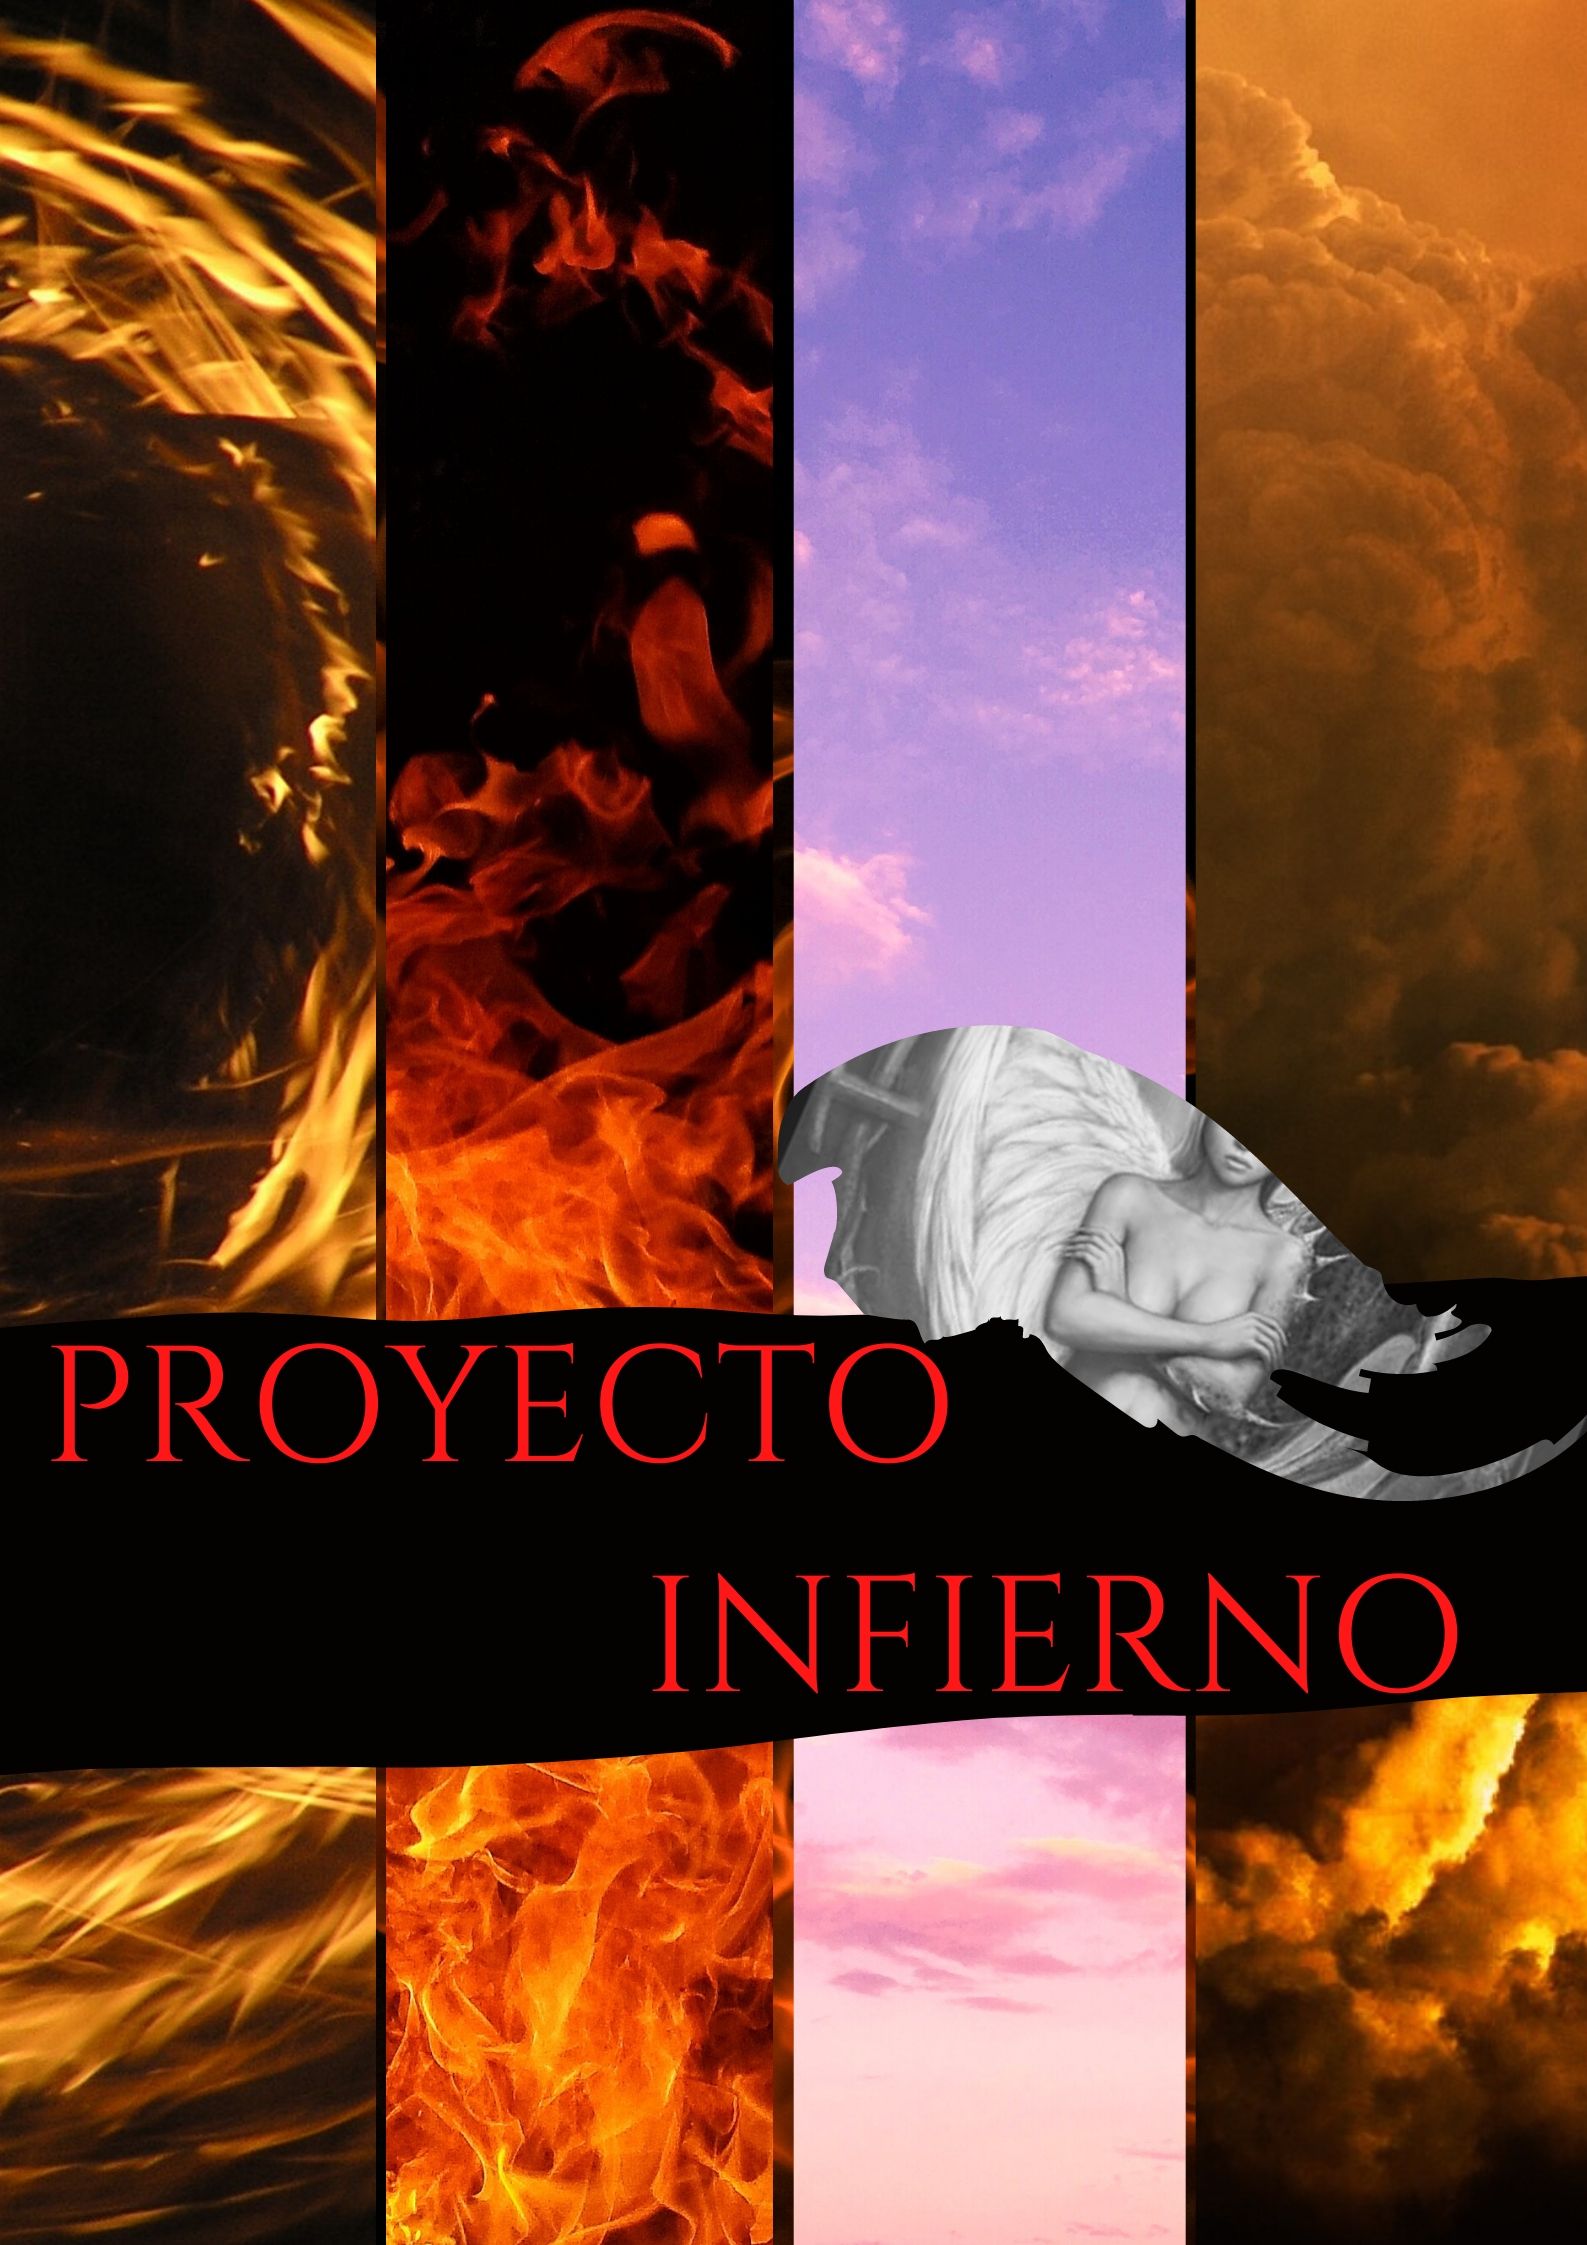 PROYECTO INFIERNO